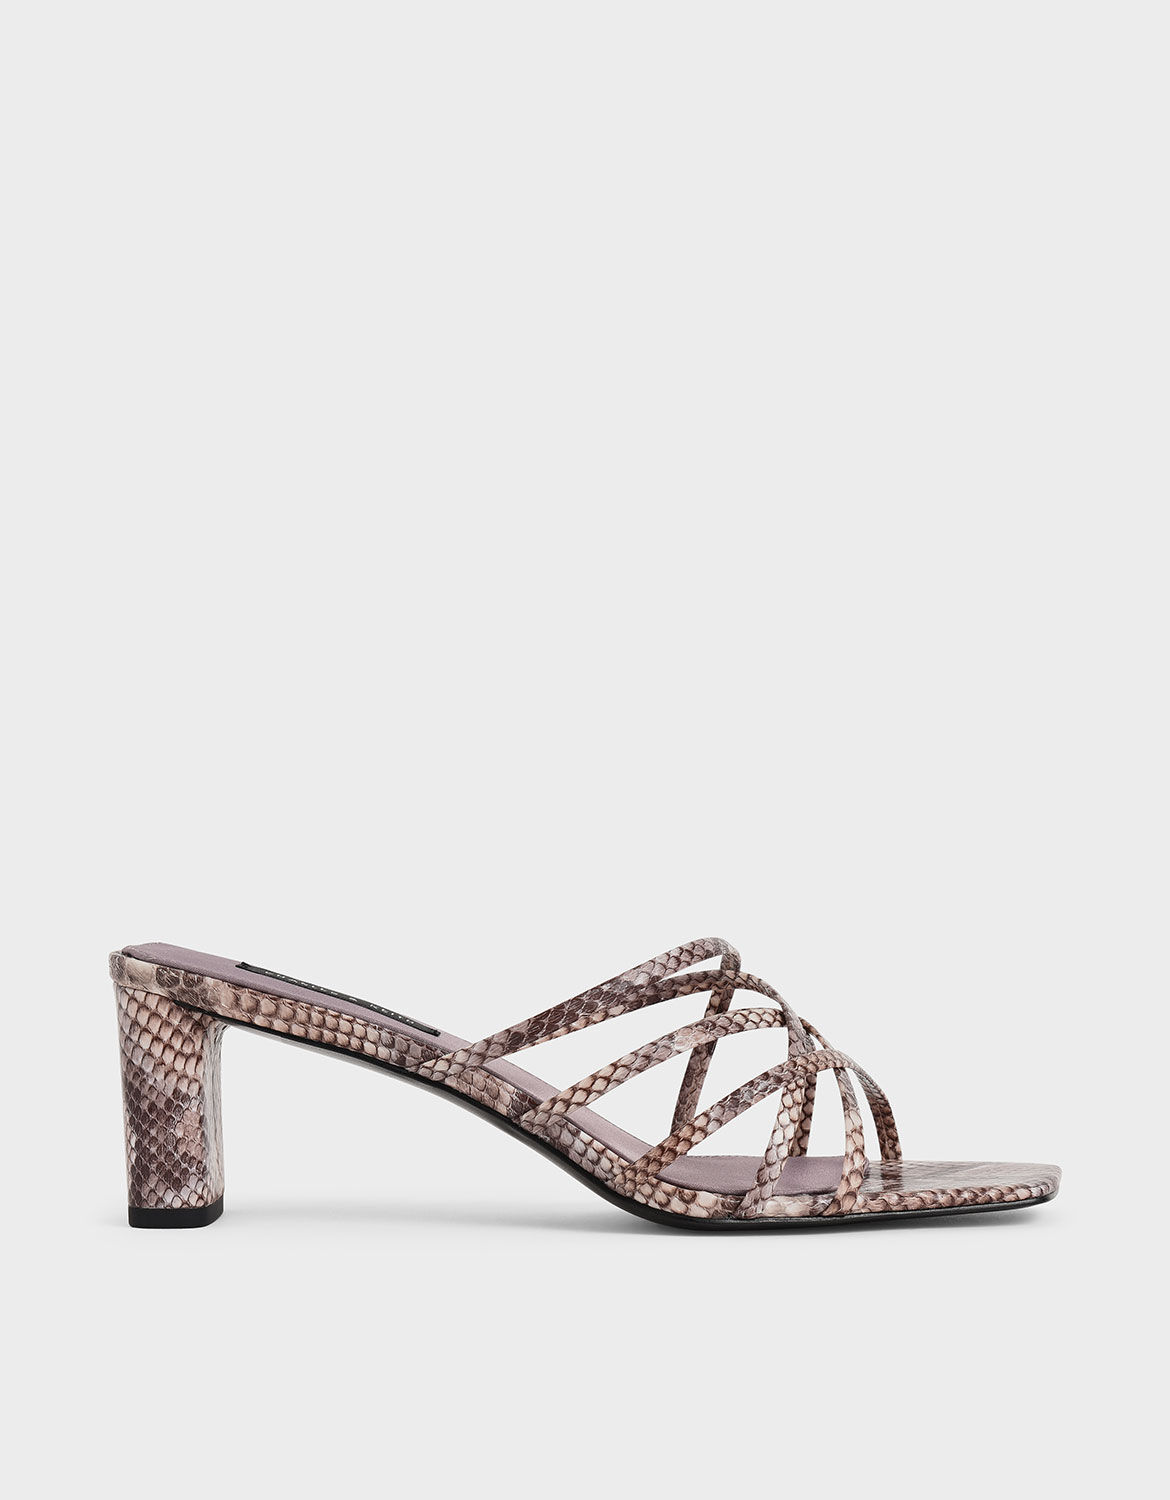 snake print mules shoes